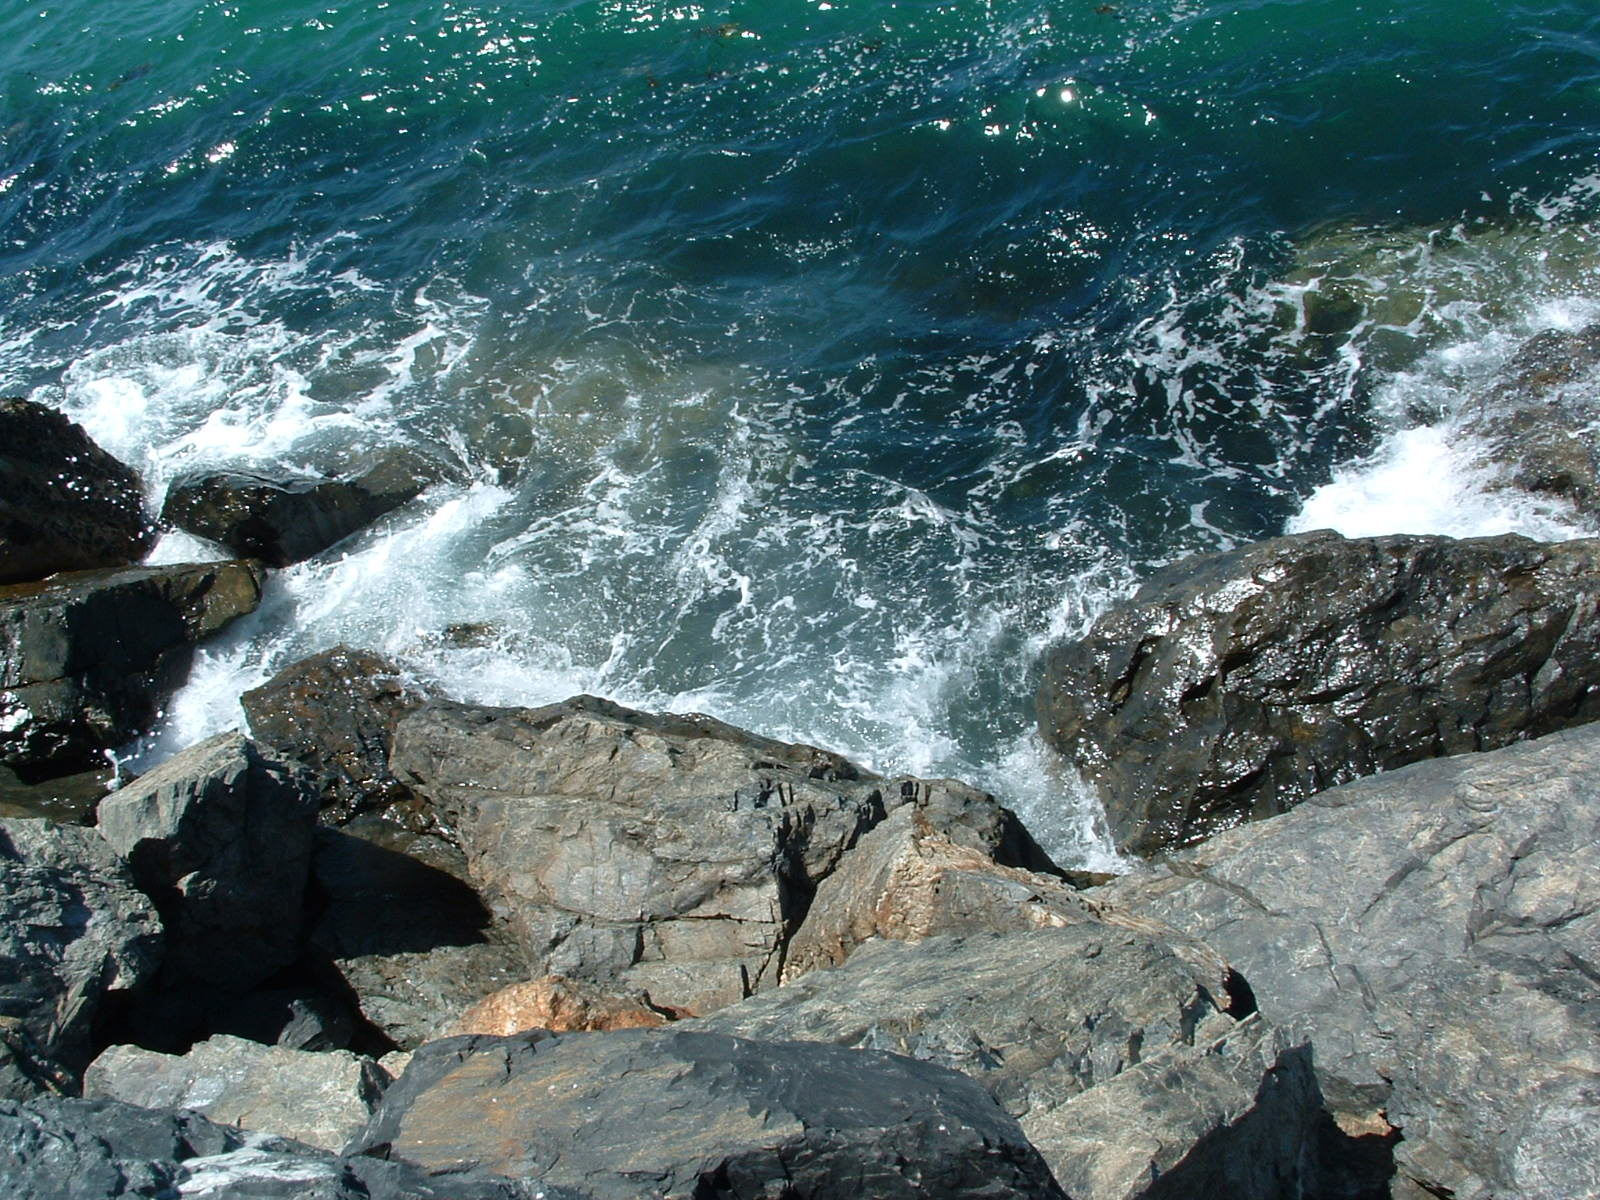 waves crashing over the rocks next to the water